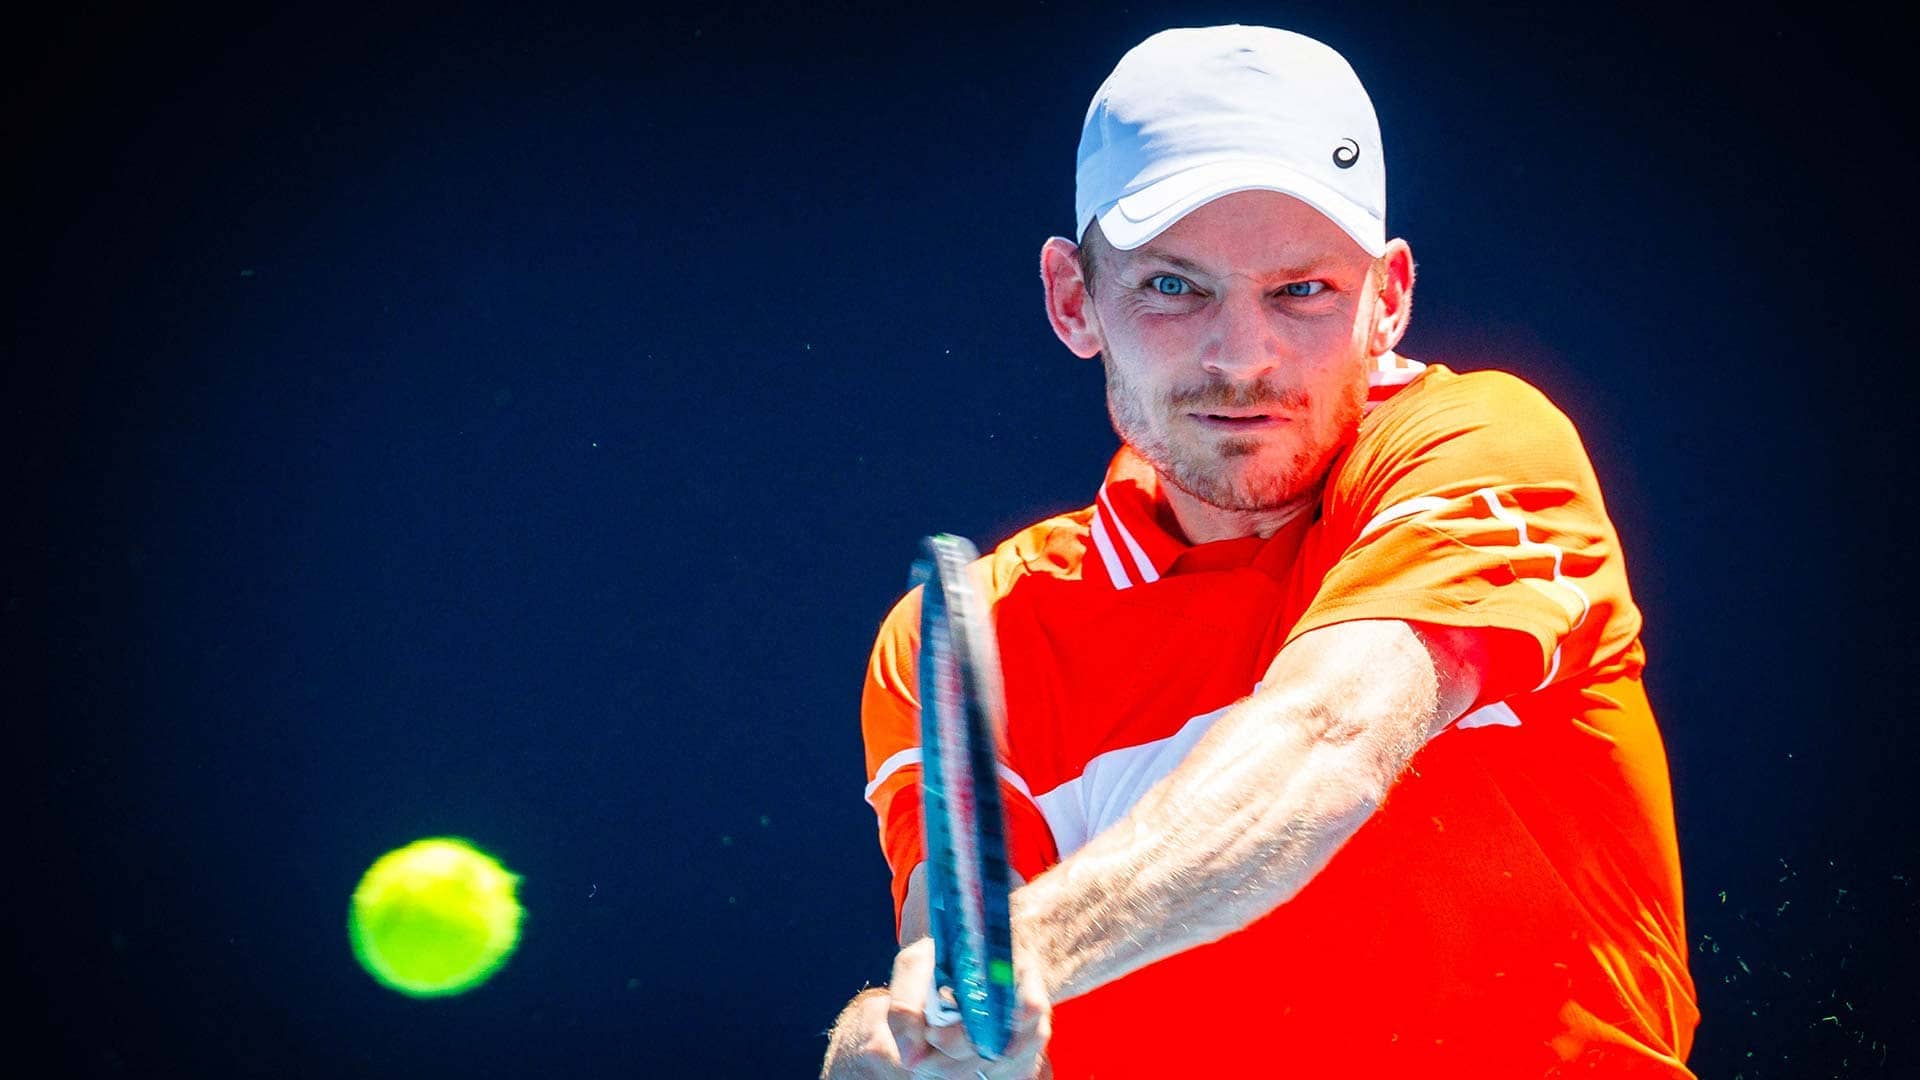 David Goffin advances to the main draw at the Australian Open.